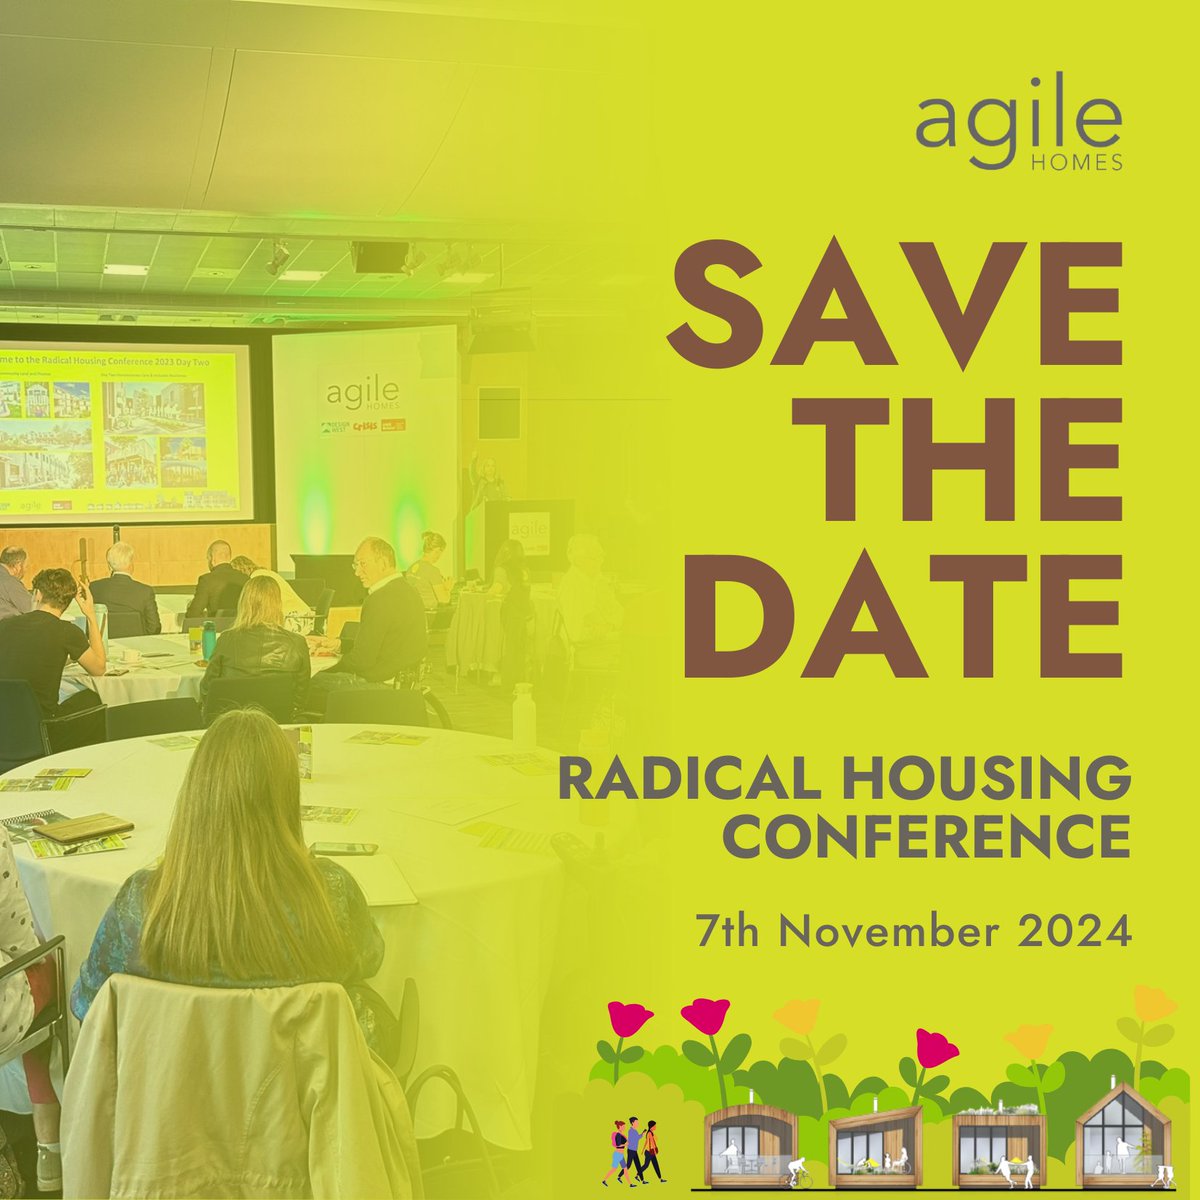 Save The Date - 7th November 2024 The Radical Housing Conference returns later this year for a satellite event that will be hosted across two sites. More details on the way soon...Hope you can join us! #RadicalHousingConference #RHC2024